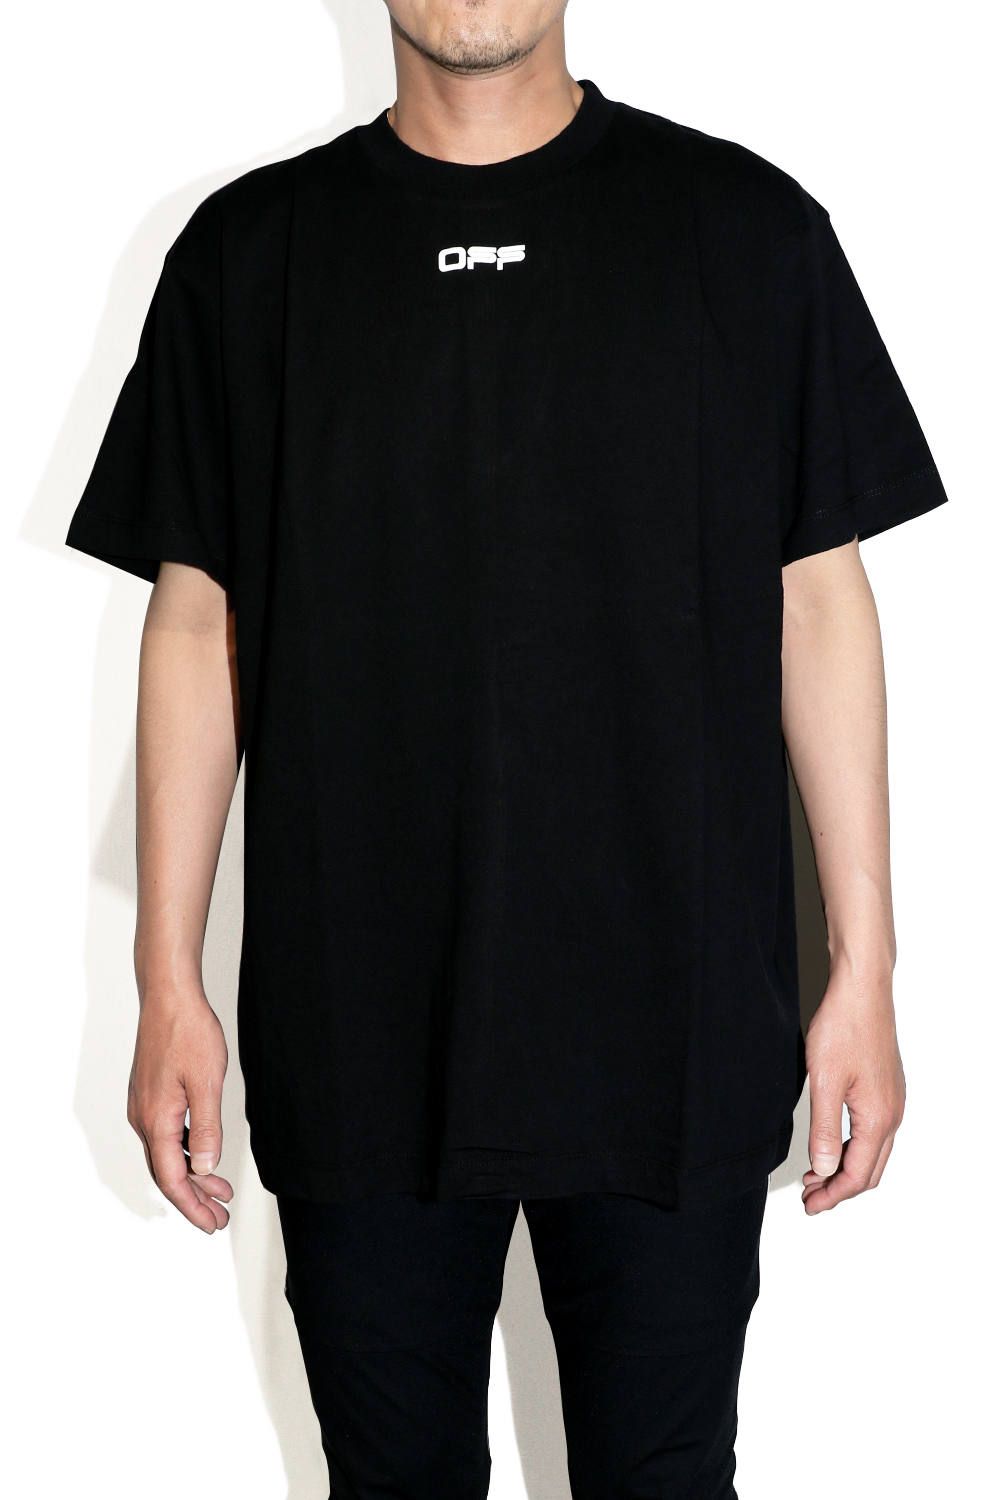 AIRPORT TAPE S/S OVER TEE - XS